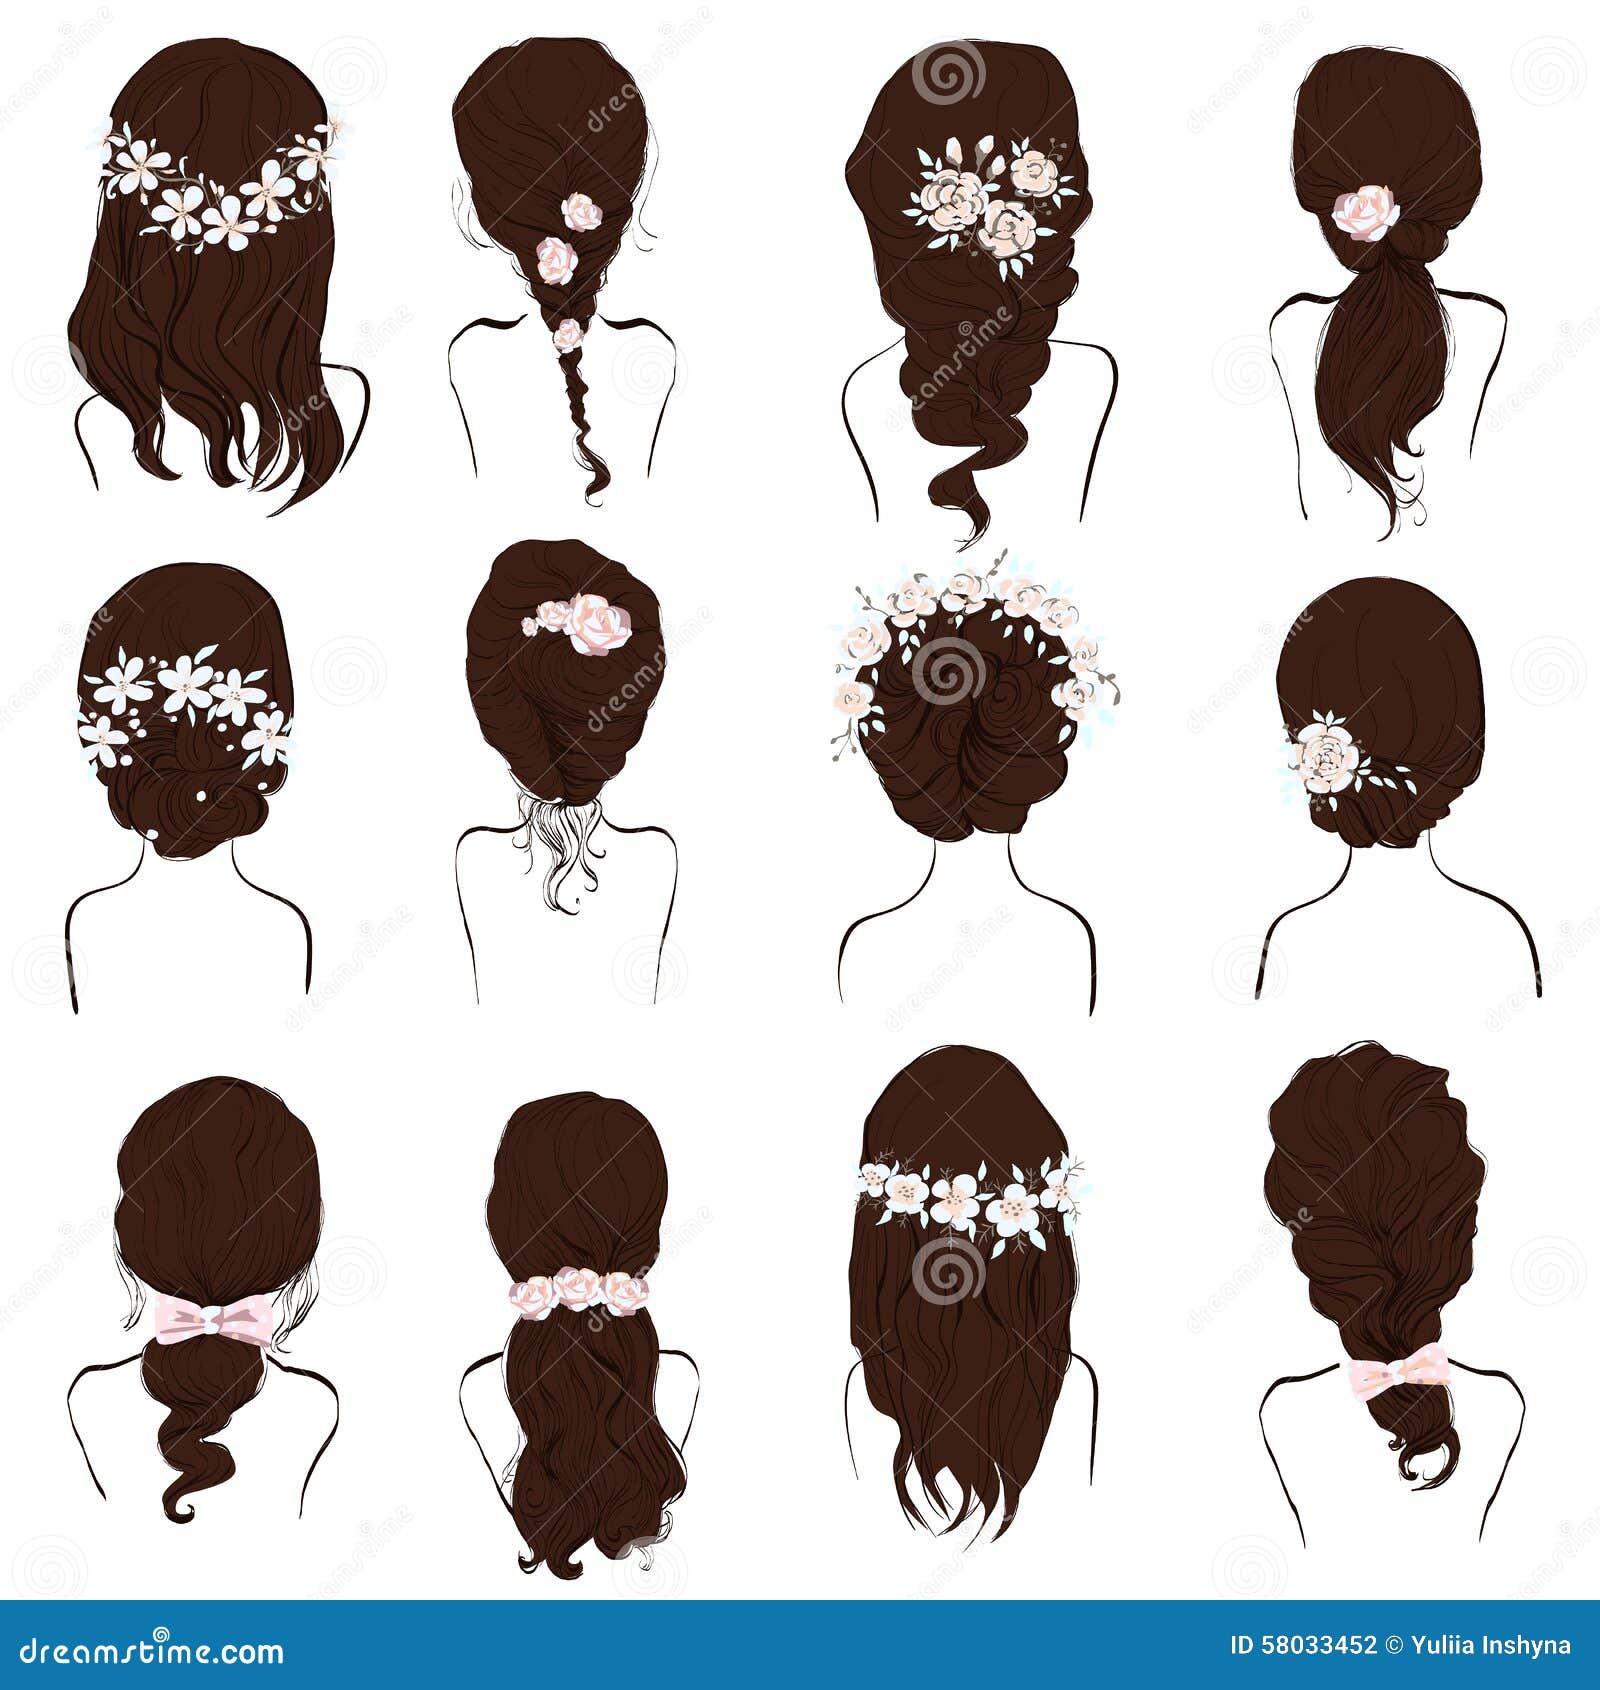 How To Pick The Best Hairstyle For Your Hair Type | FashionBeans